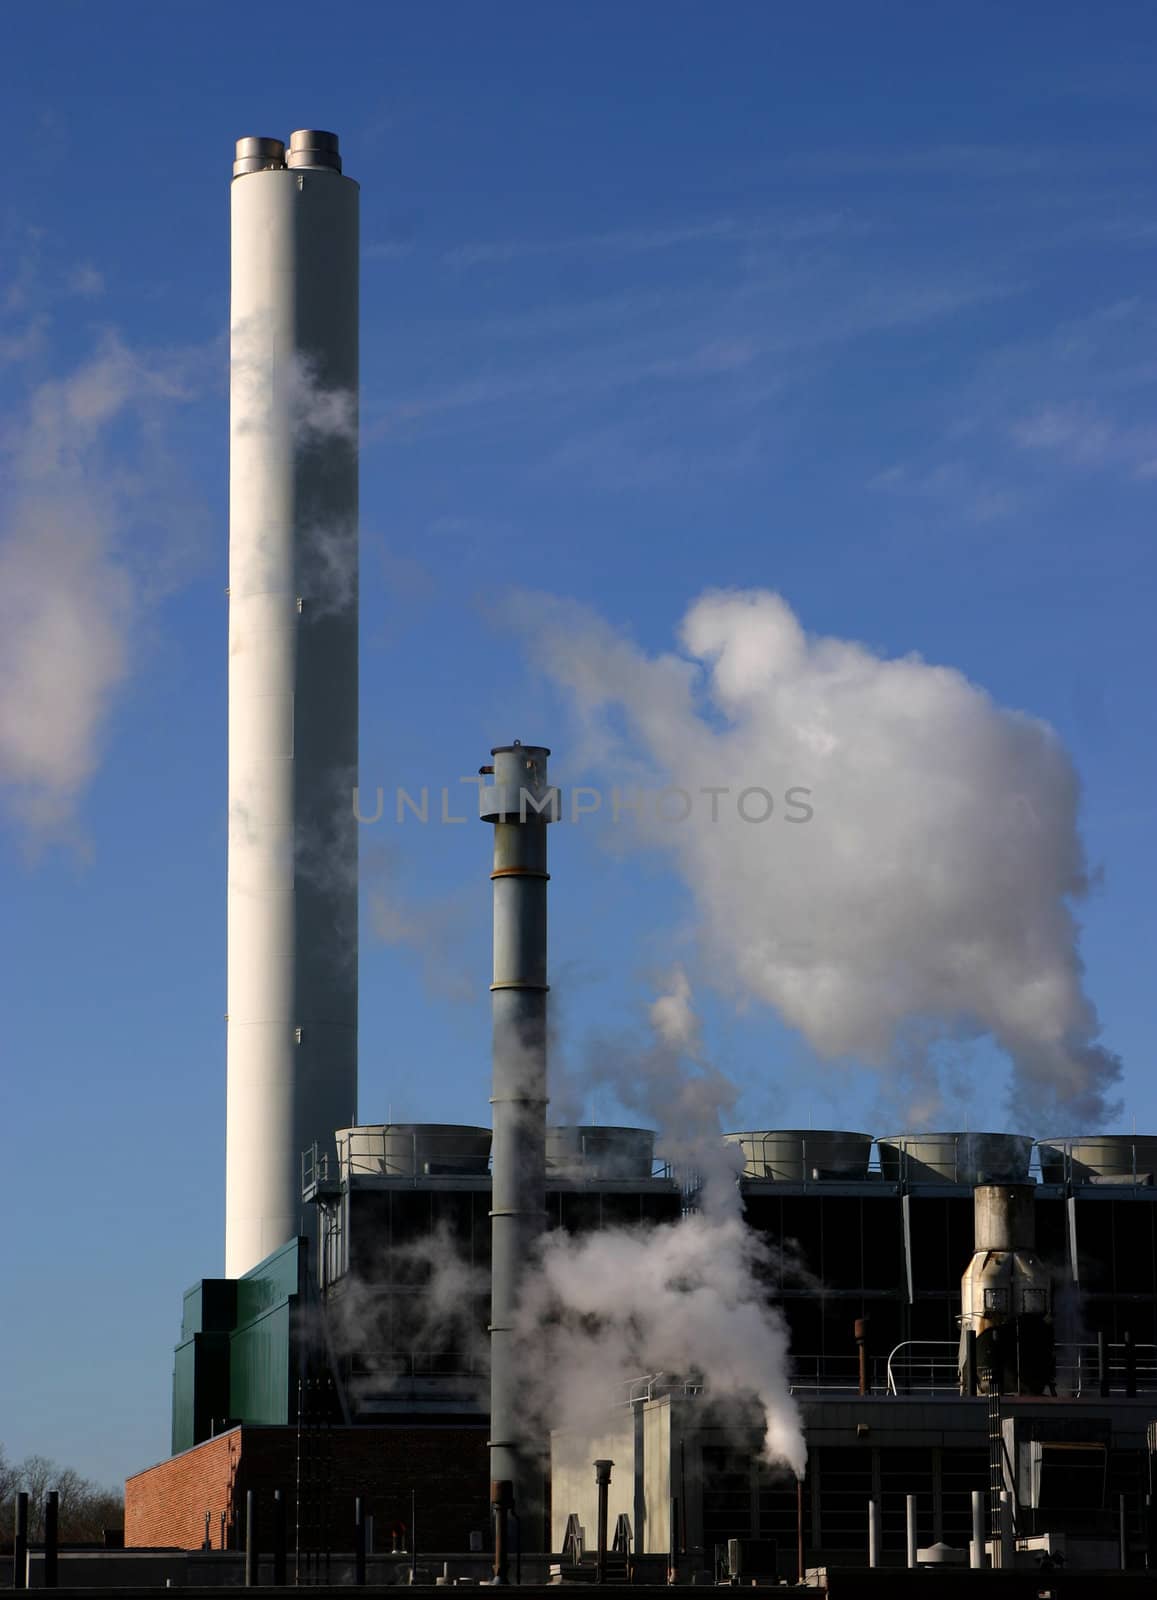 Evaporations coolers & steam stacks in front of a blue sky